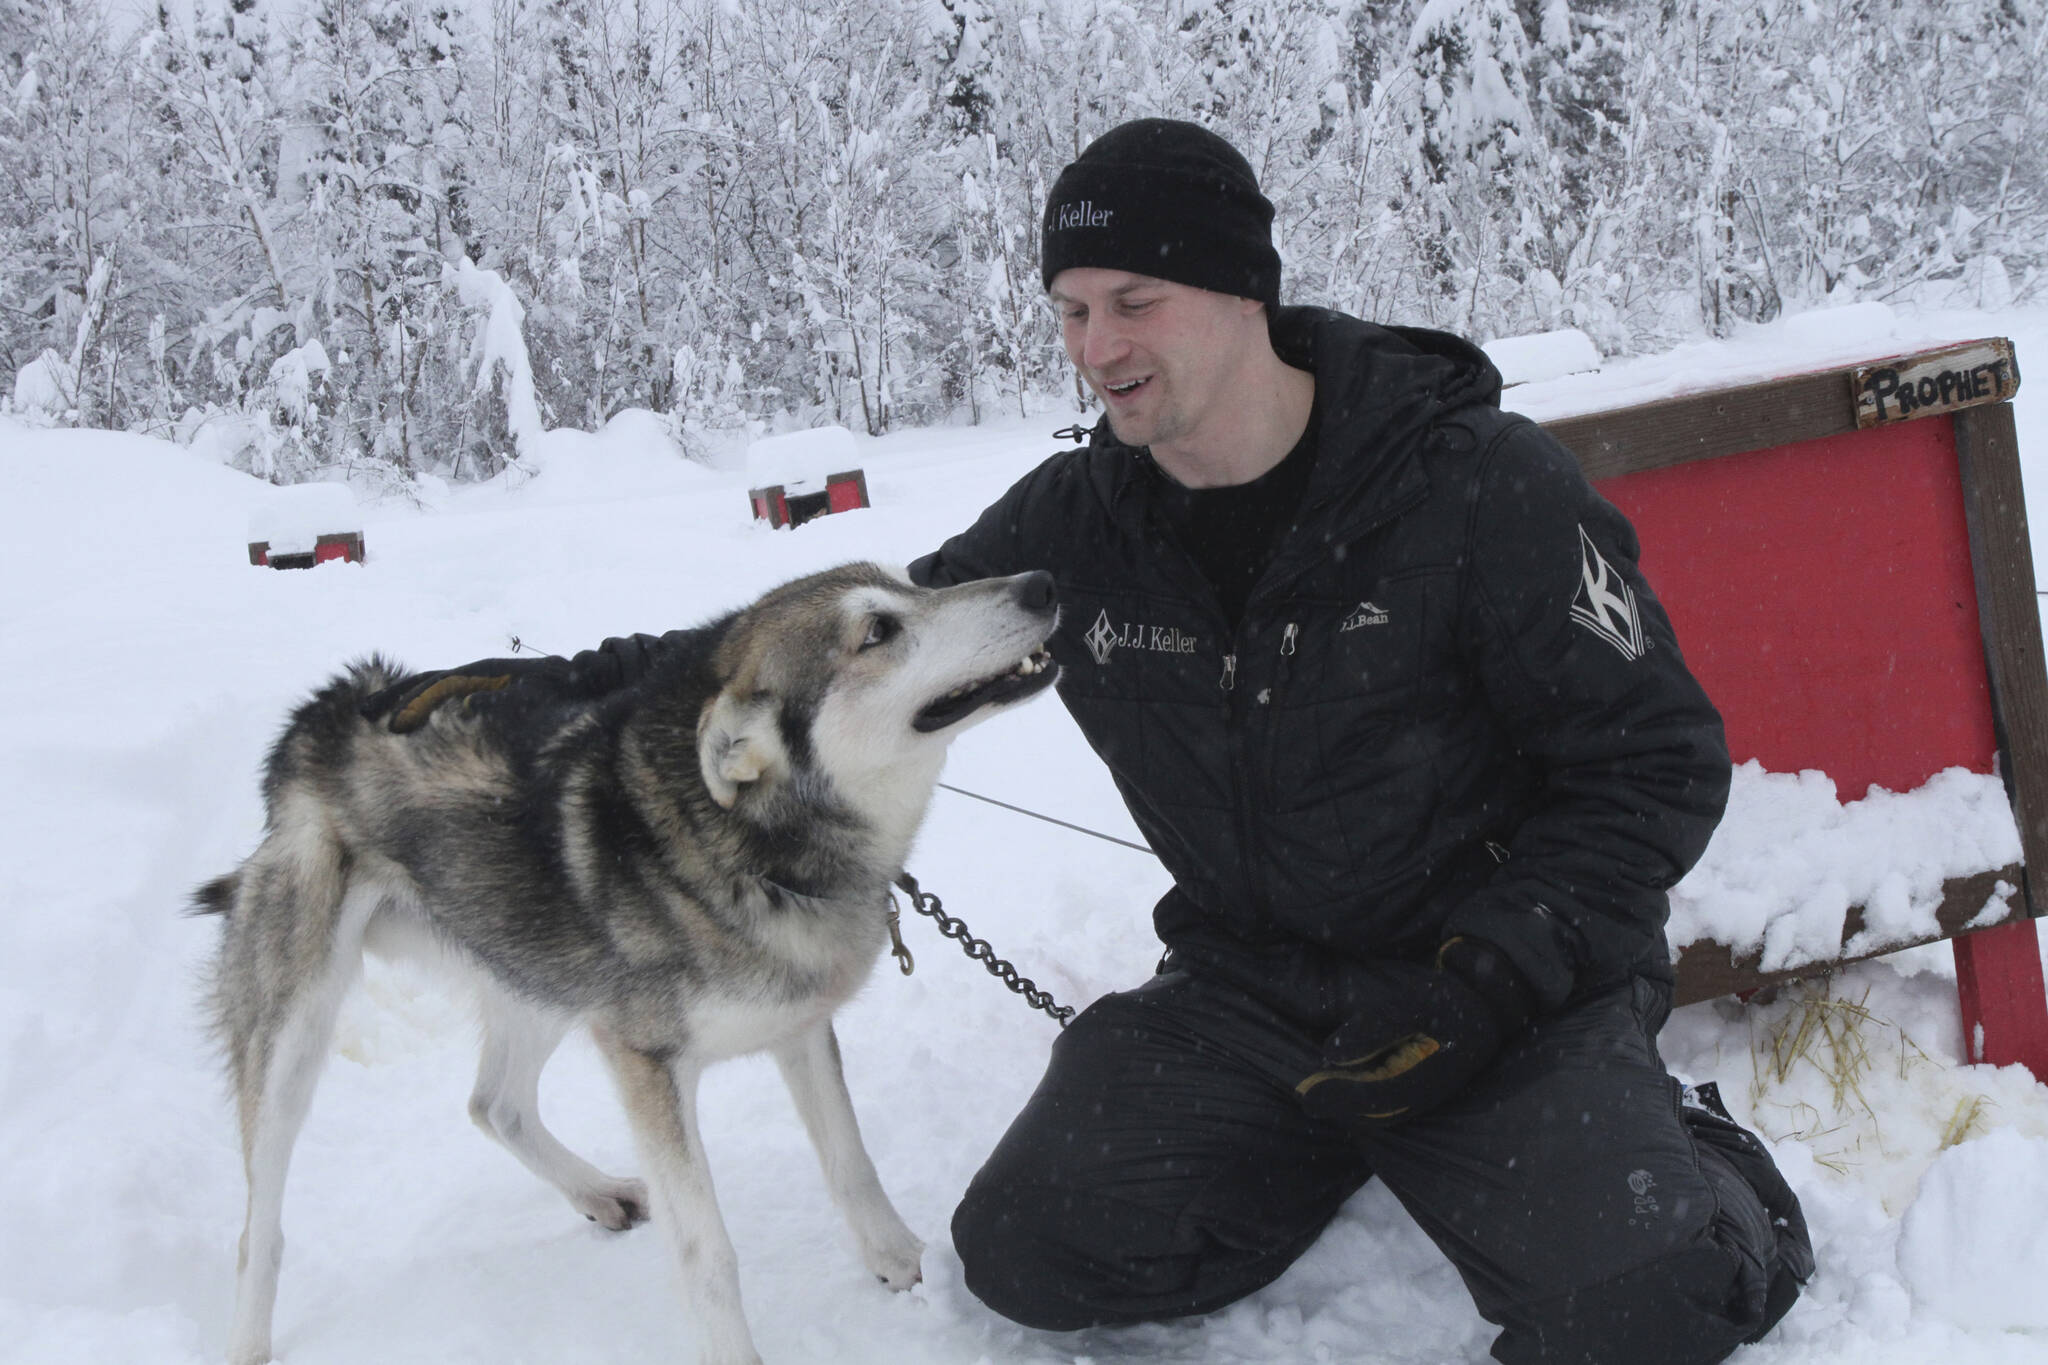 Five-time Iditarod champion Dallas Seavey is shown Feb. 22, 2022, playing with Prophet, one of his lead dogs, at his kennel in Talkeetna, Alaska. Seavey is tied with musher Rick Swenson for the most Iditarod victories ever, and Seavey is looking for his sixth title when the Iditarod Trail Sled Dog Race starts this weekend in Alaska. (AP Photo / Mark Thiessen)